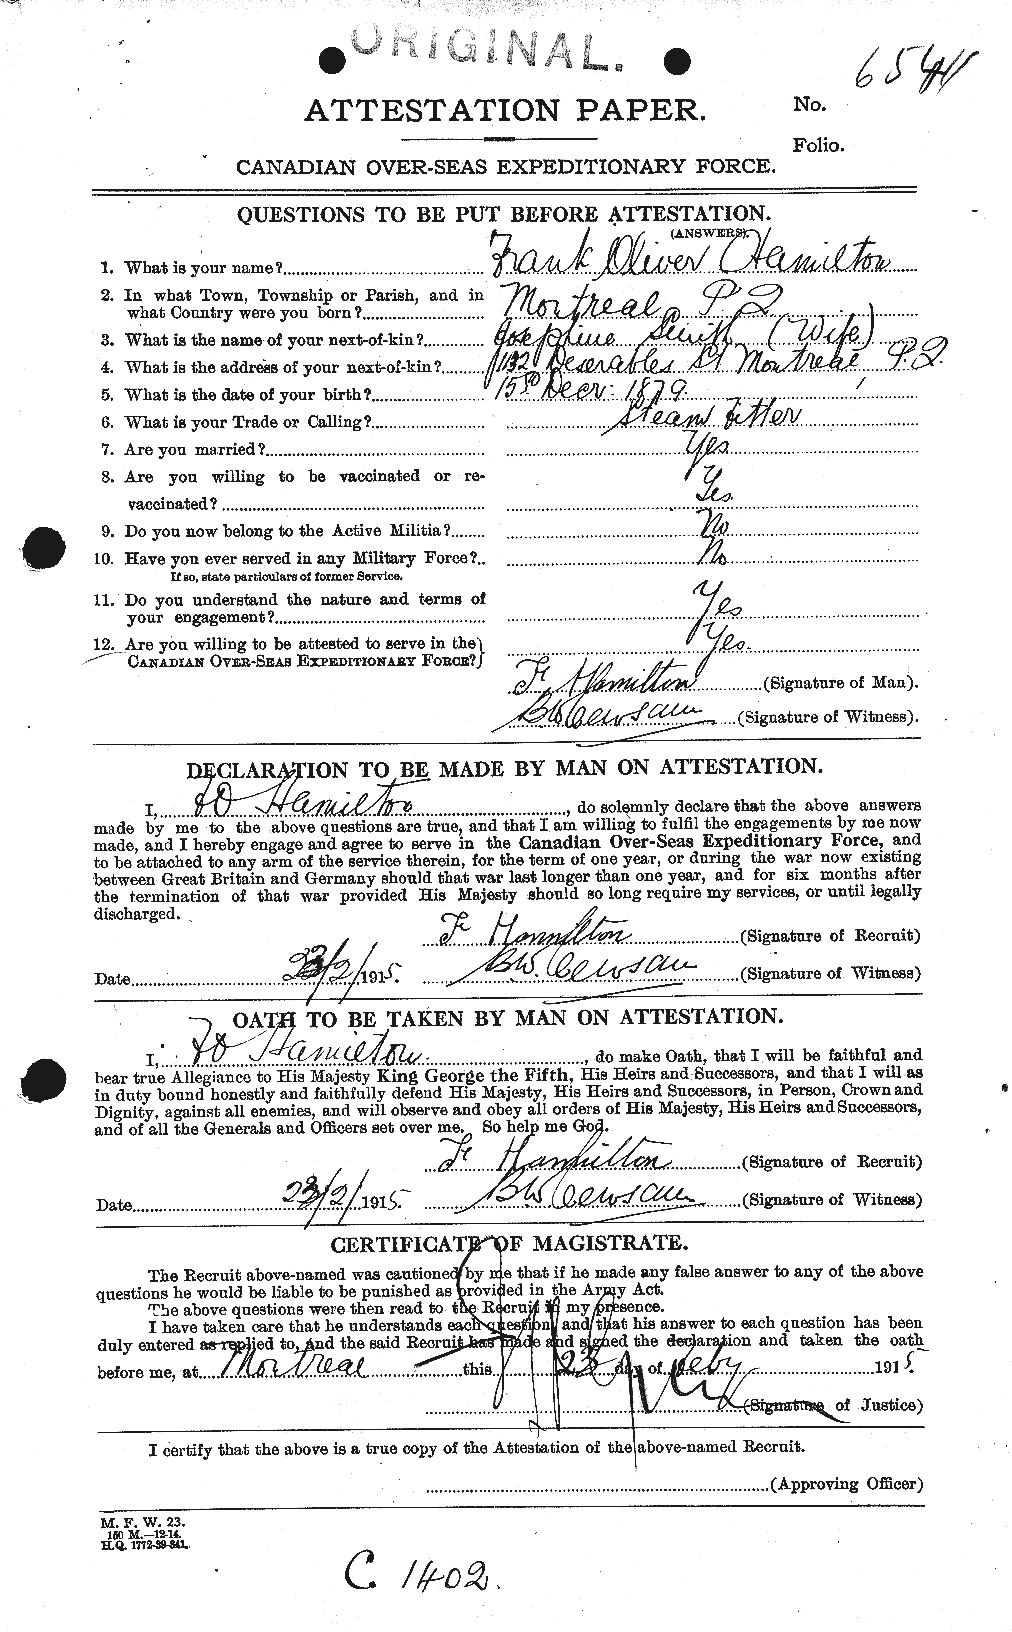 Personnel Records of the First World War - CEF 372392a